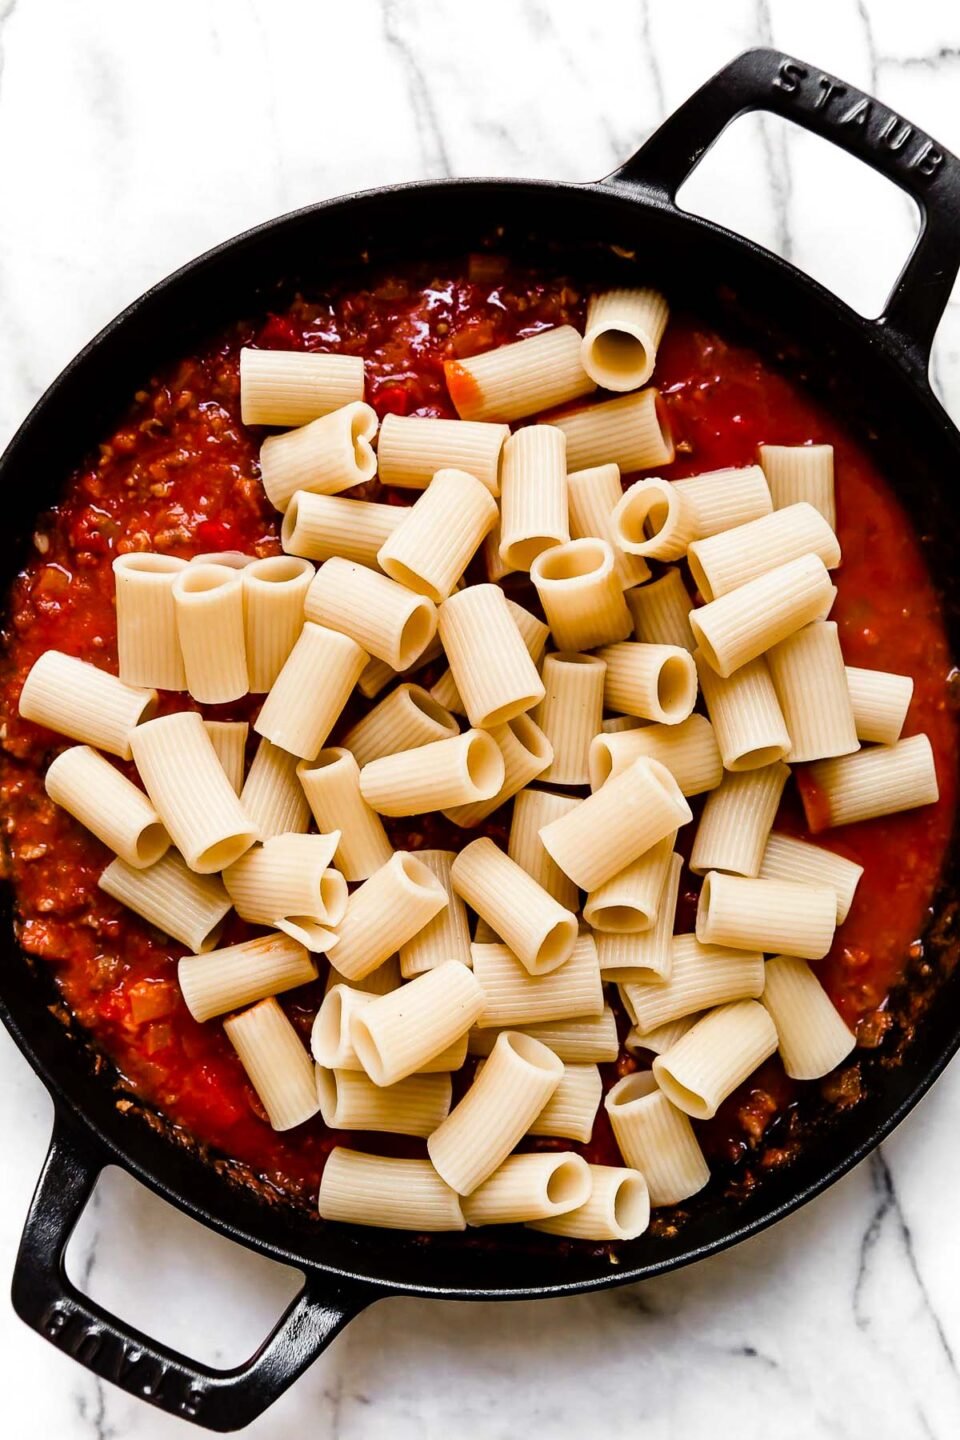 Rigatoni pasta is added to Italian sausage and peppers tomato sauce inside of a large black Staub double handled skillet. The skillet sits atop a white and gray marble surface.